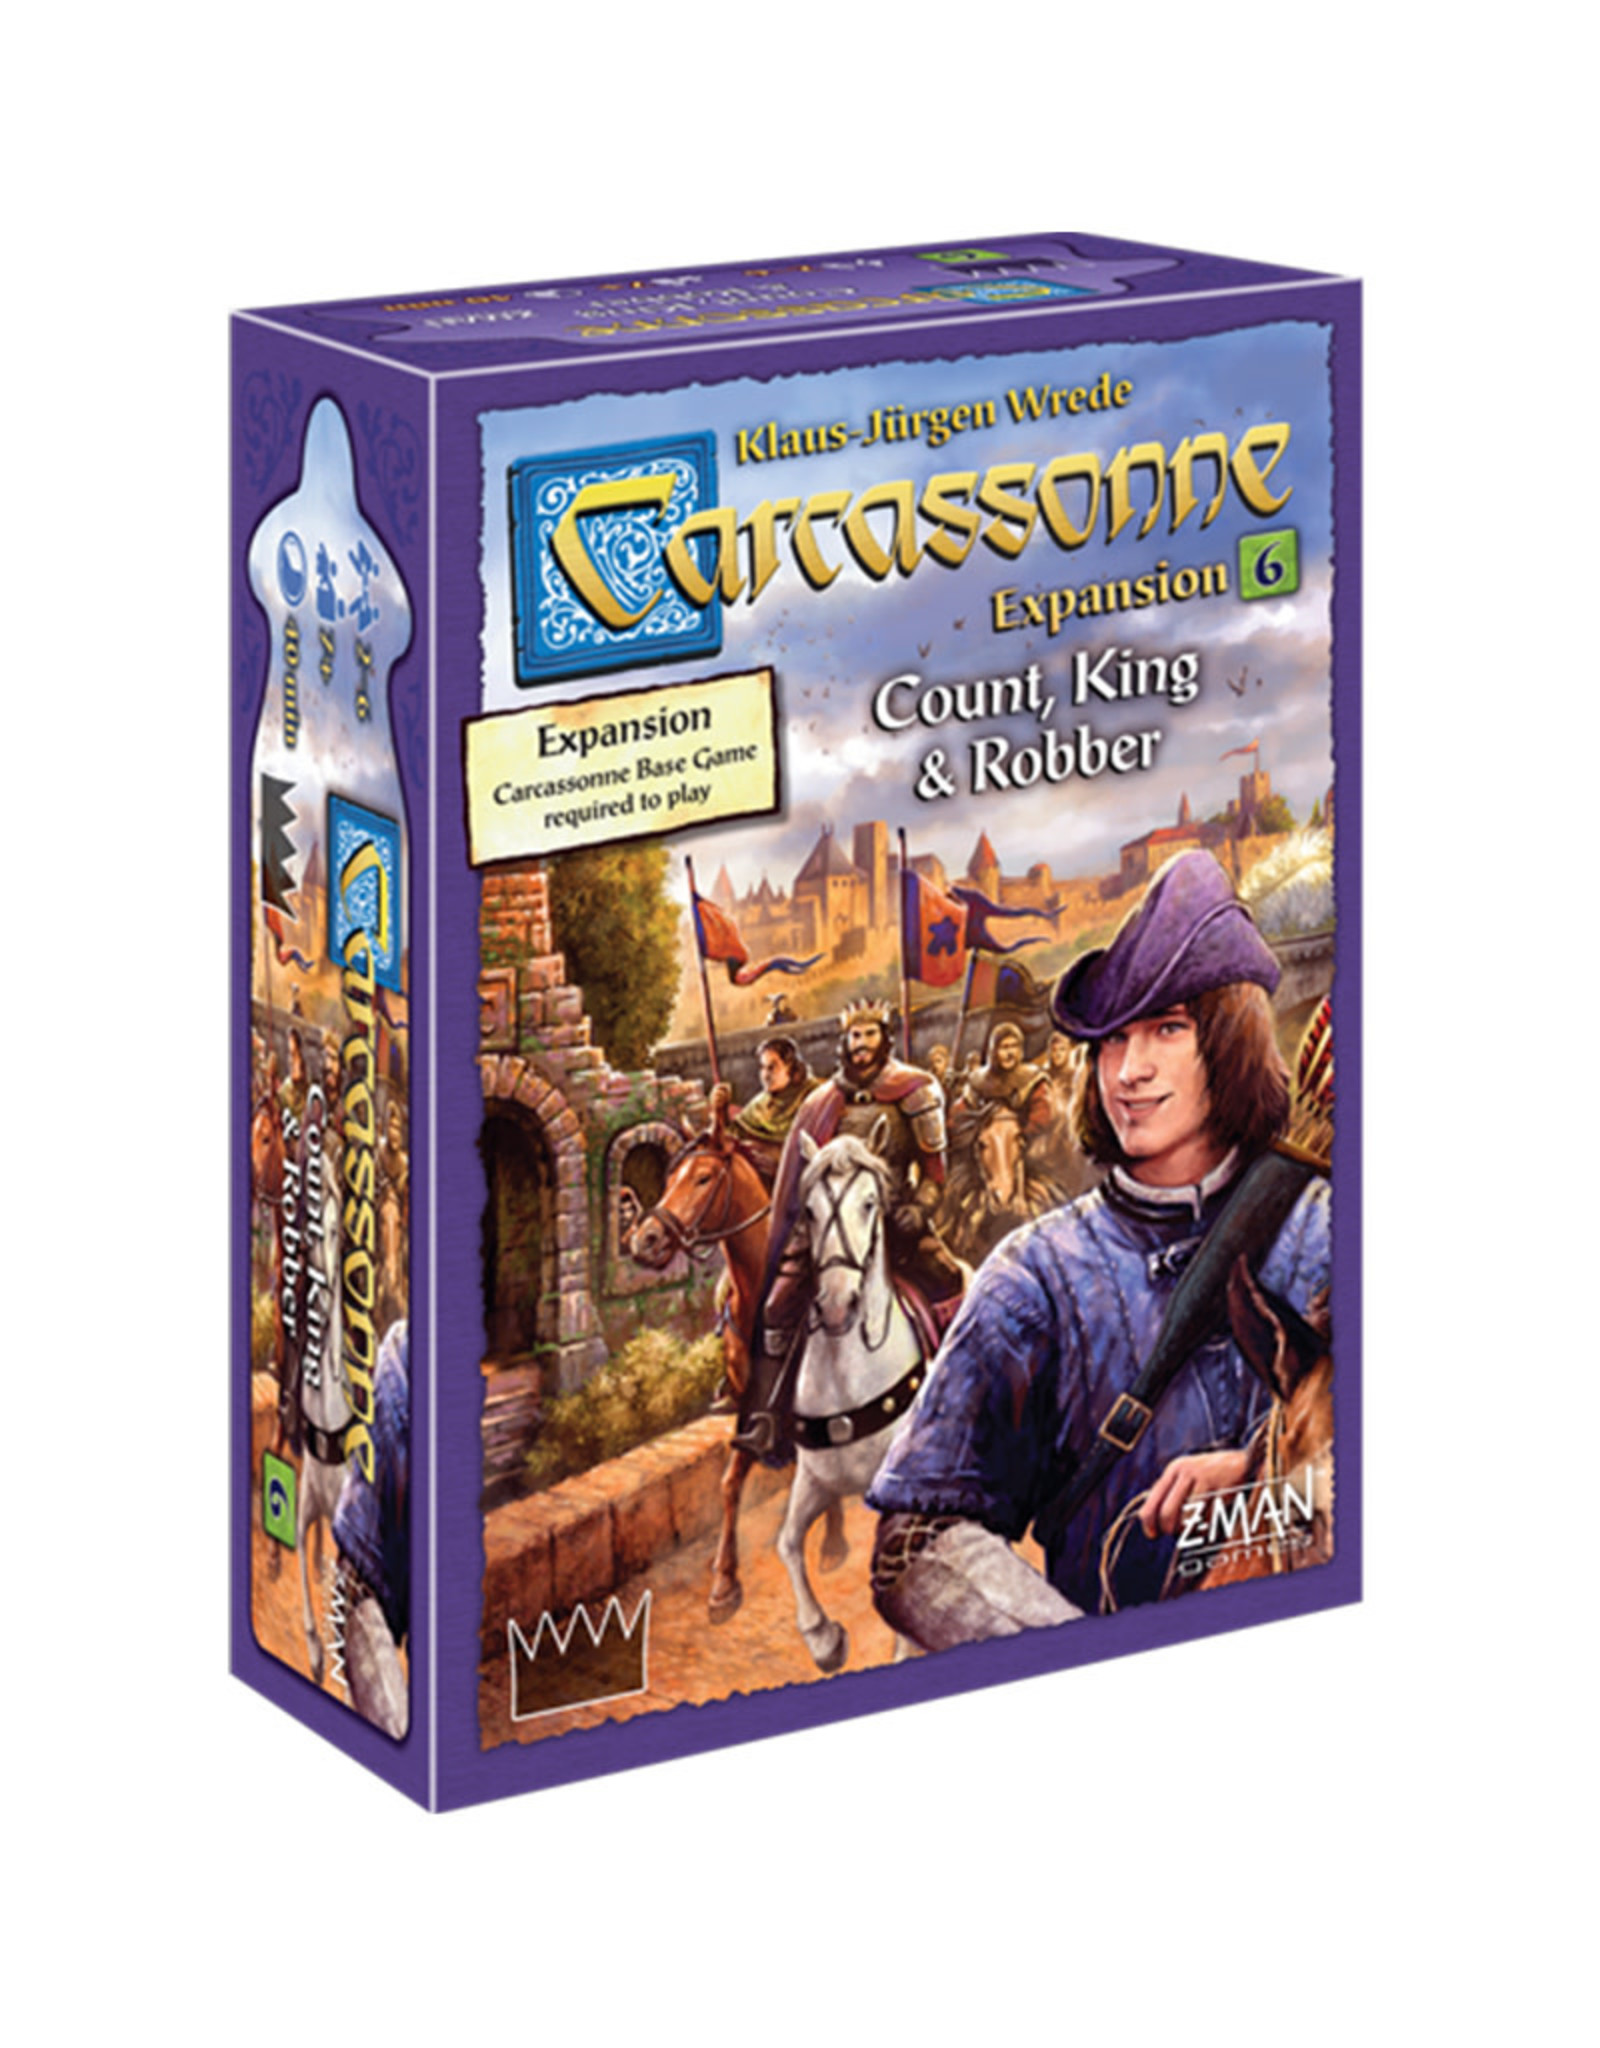 Carcassonne Expansion 6 Count/King/Robber